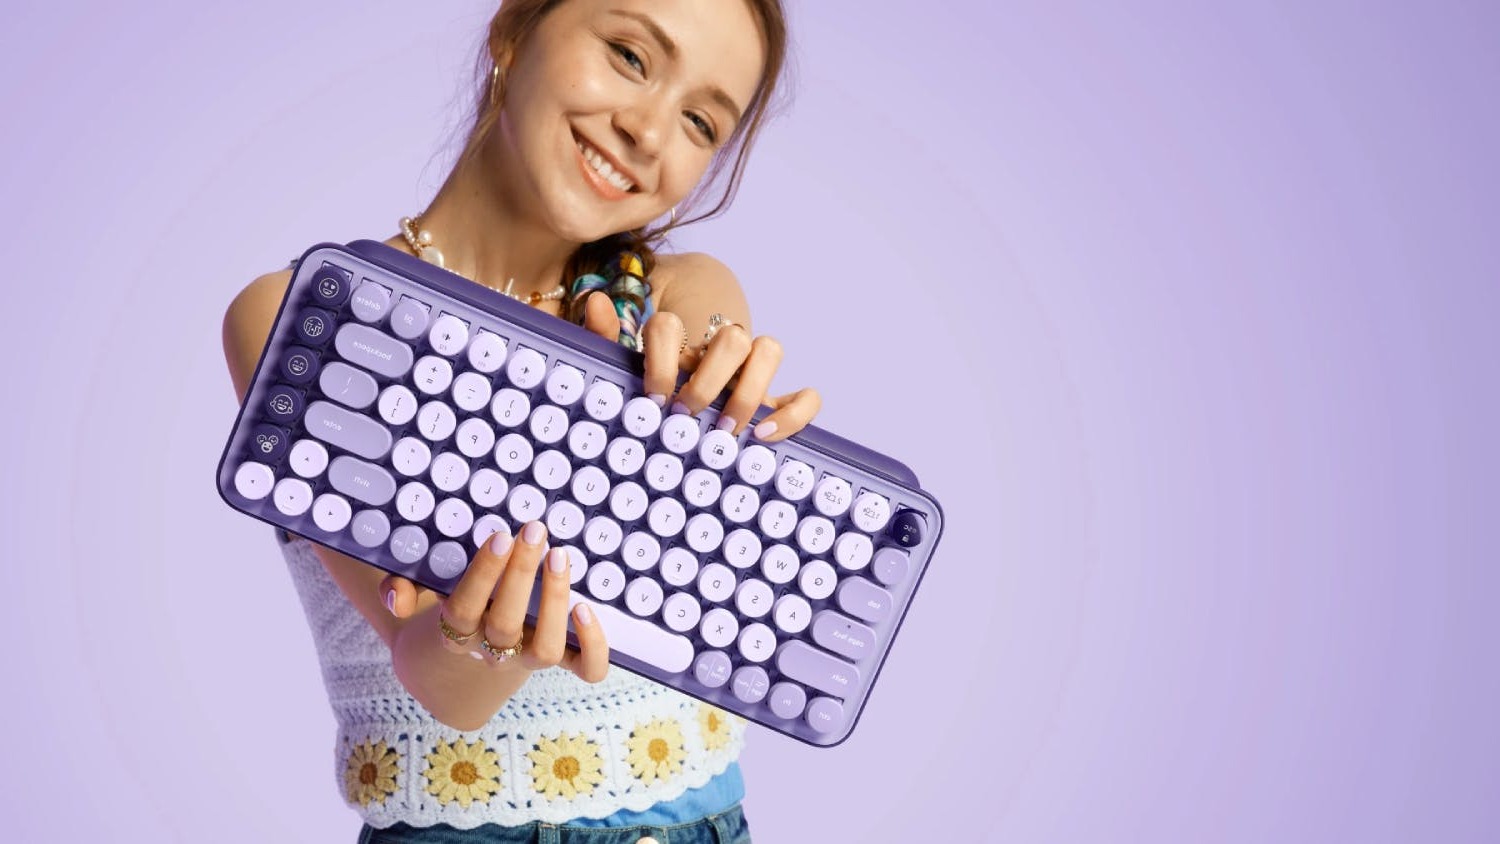 Keyboard Review: The Perfect Tech Accessory for Her